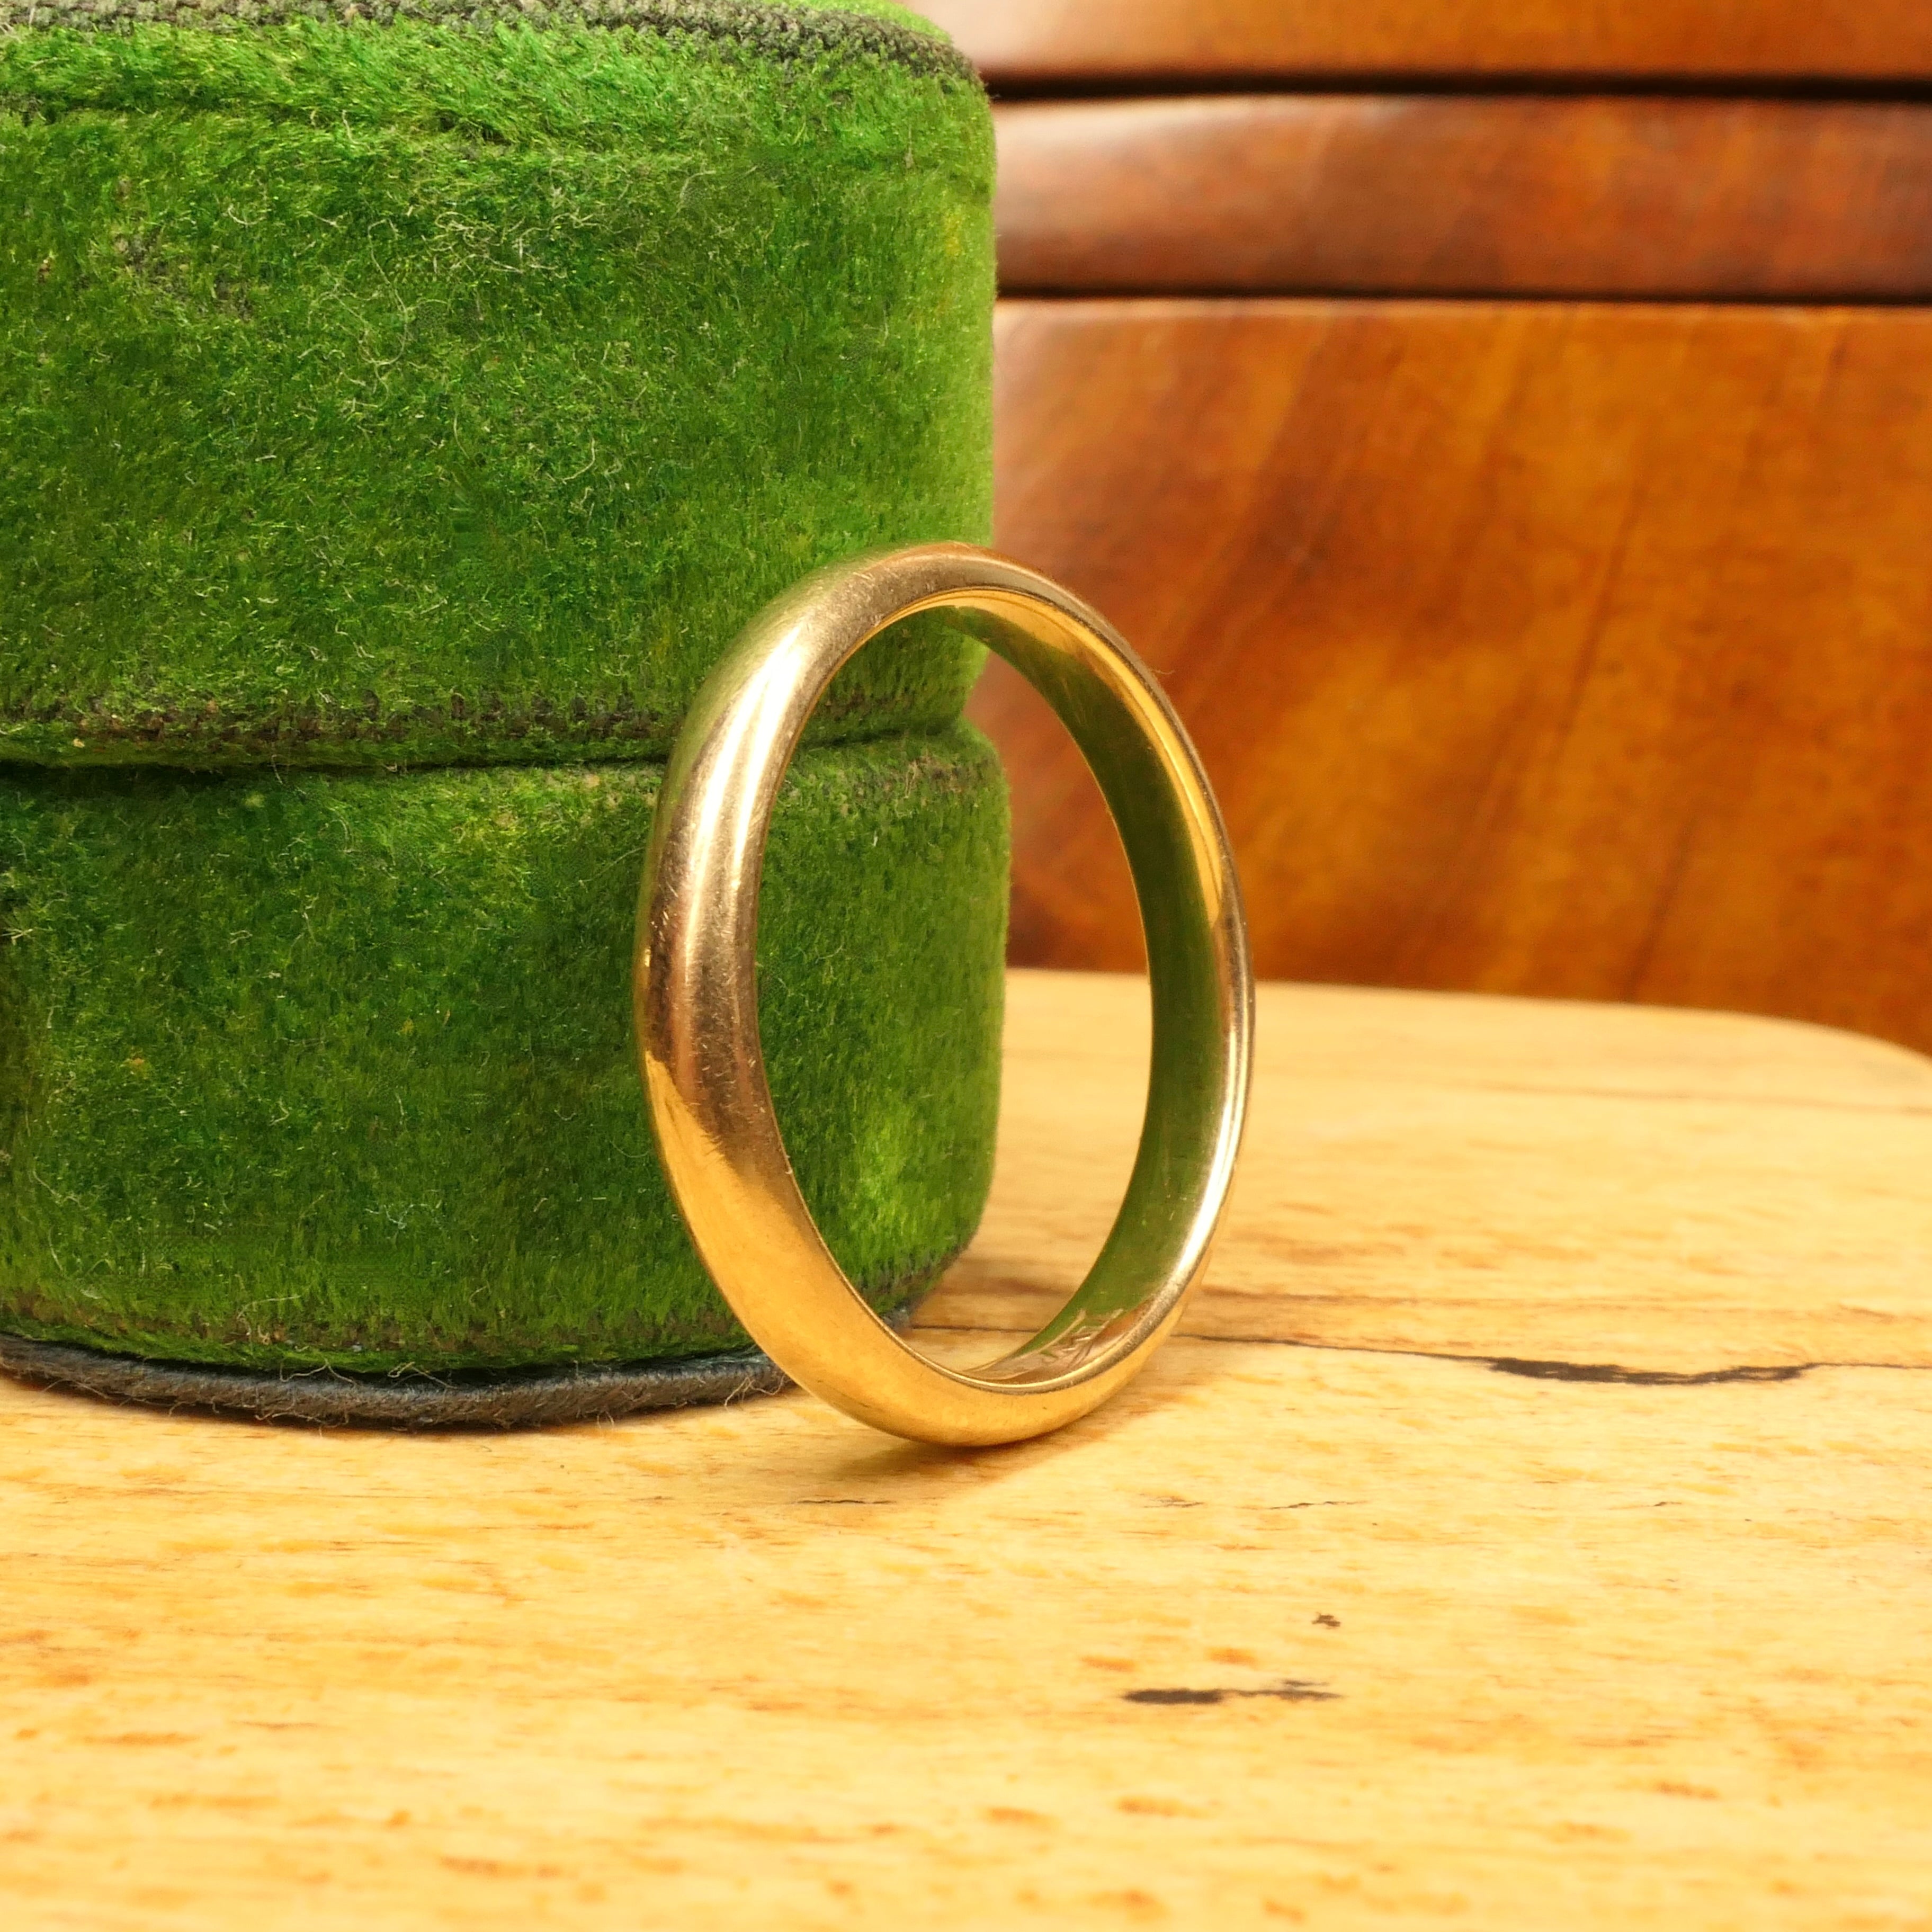 Vintage, 1940s, 9ct Gold, Utility wedding band ring, hallmarked in 1946